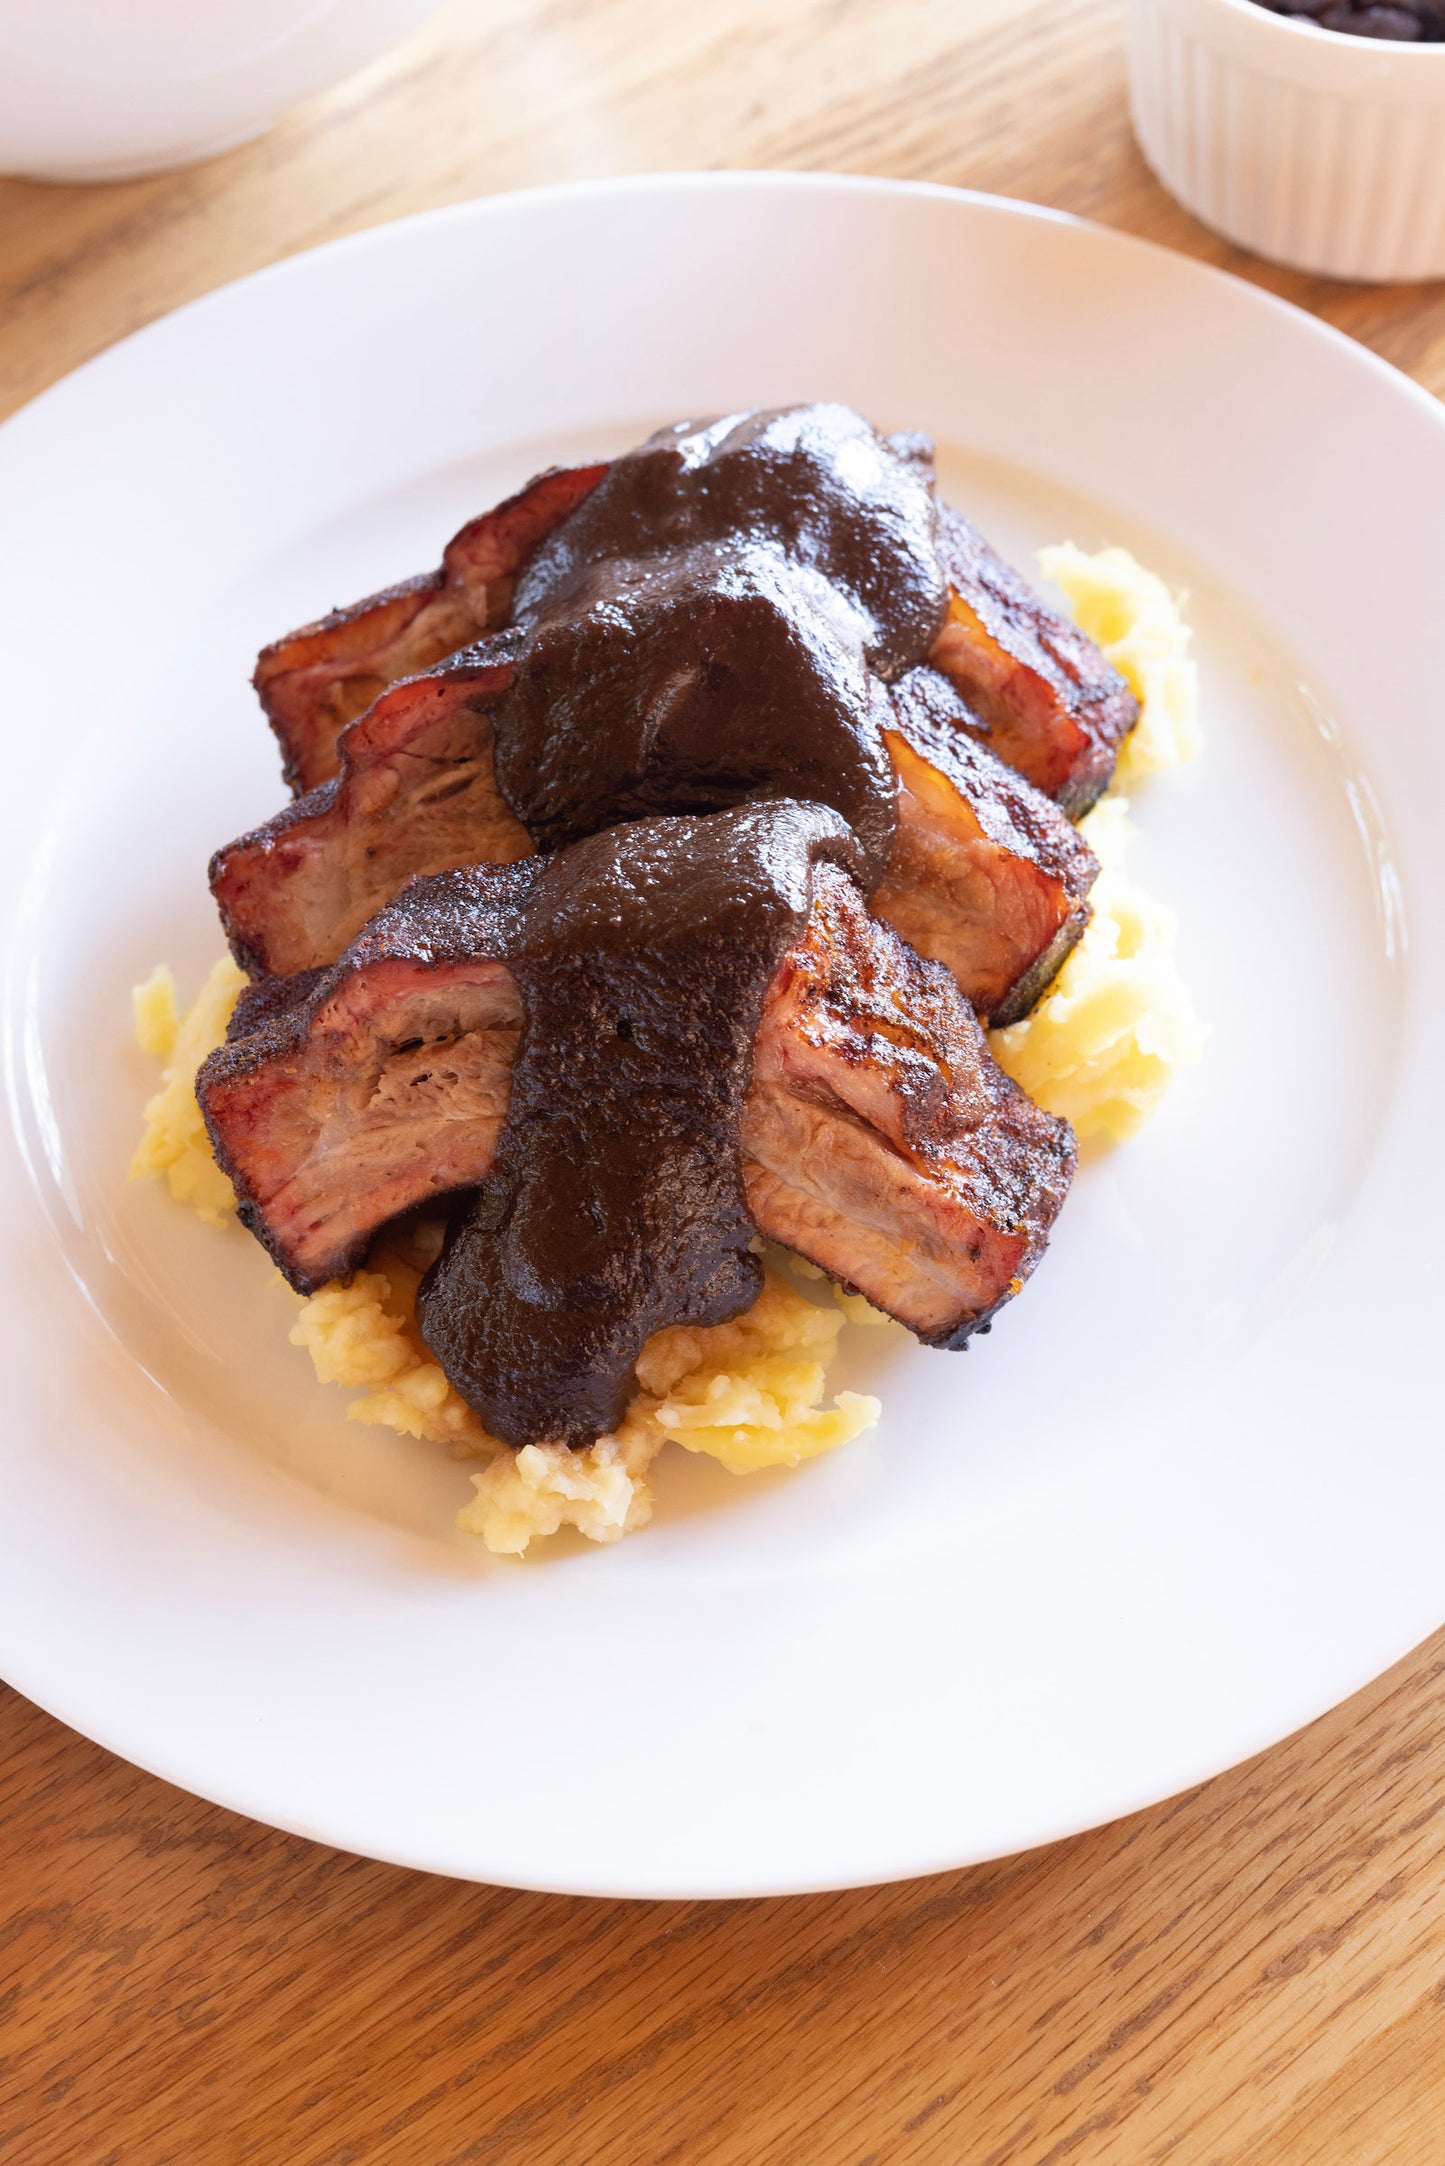 Ribs 'N' Sweets with Paleo-Q Sauce